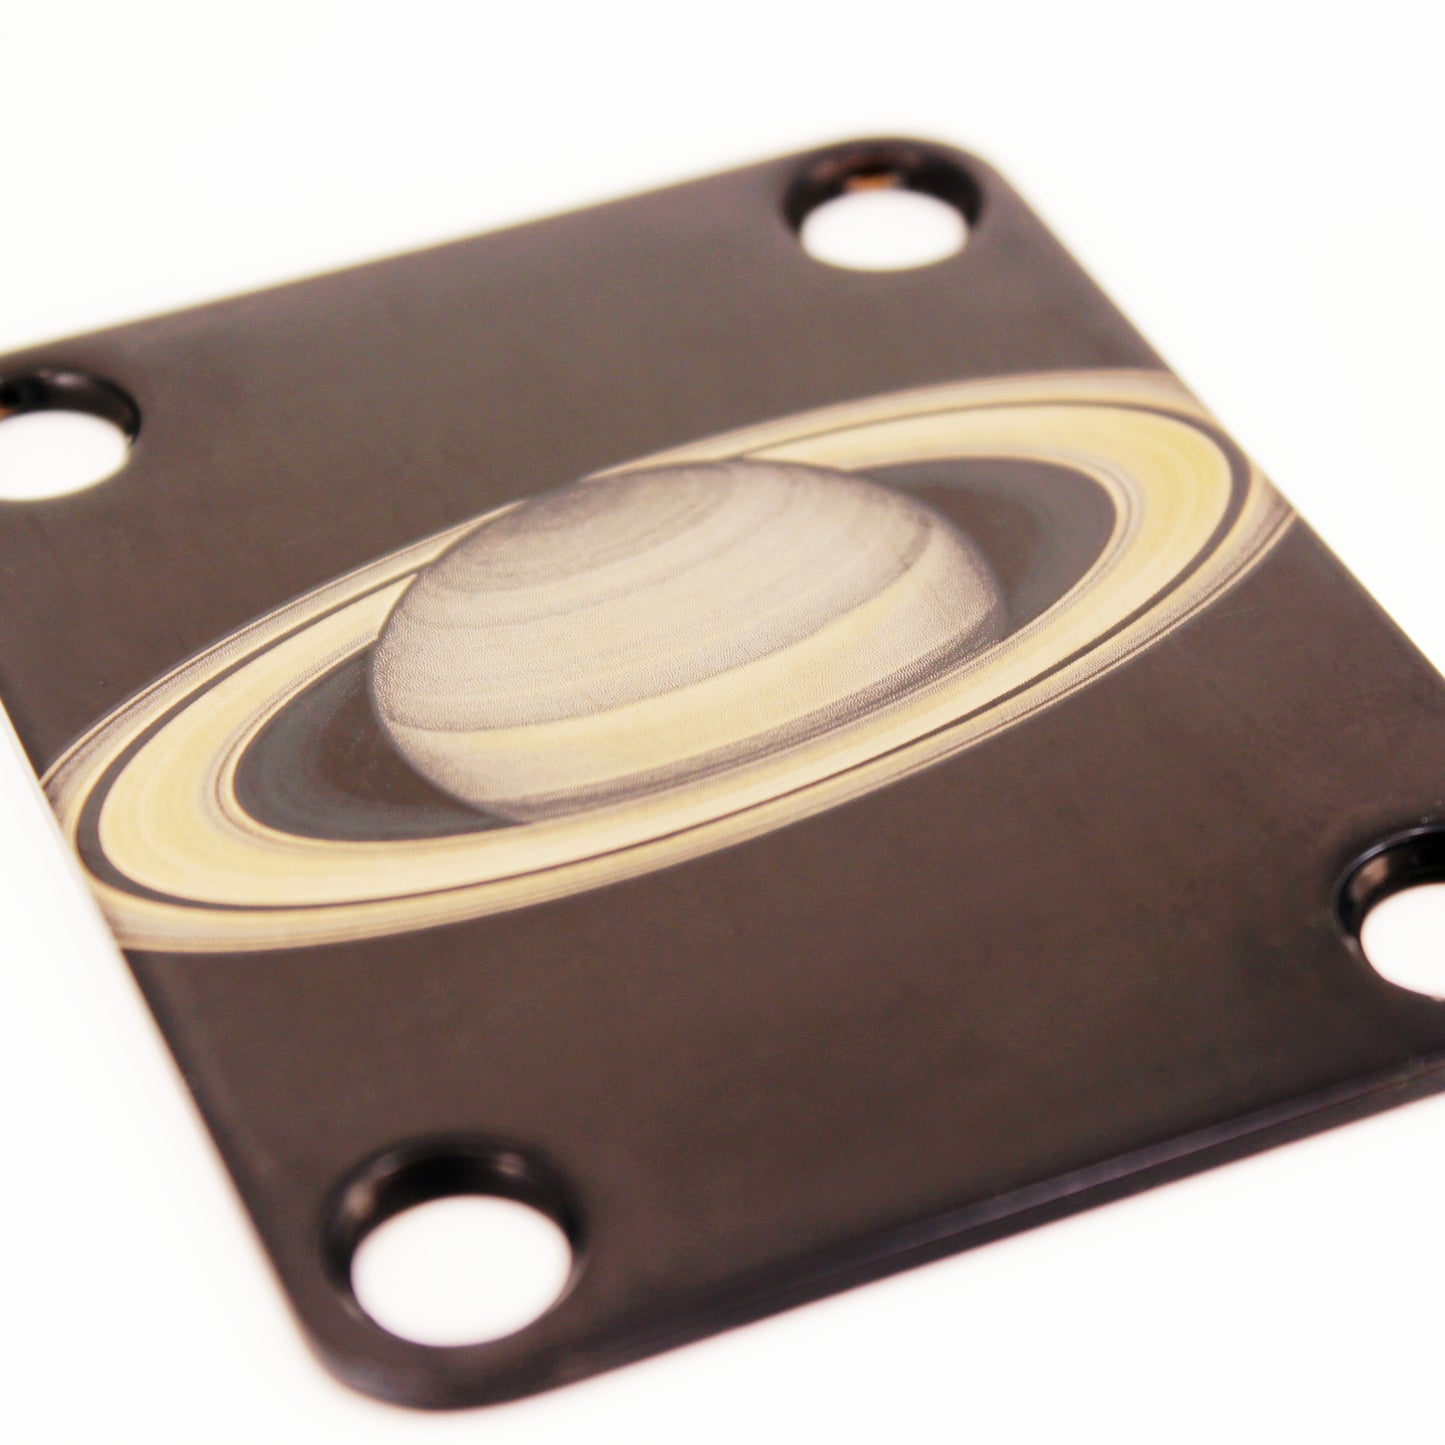 Guitar neck plate - Trip to Saturn - Fender size